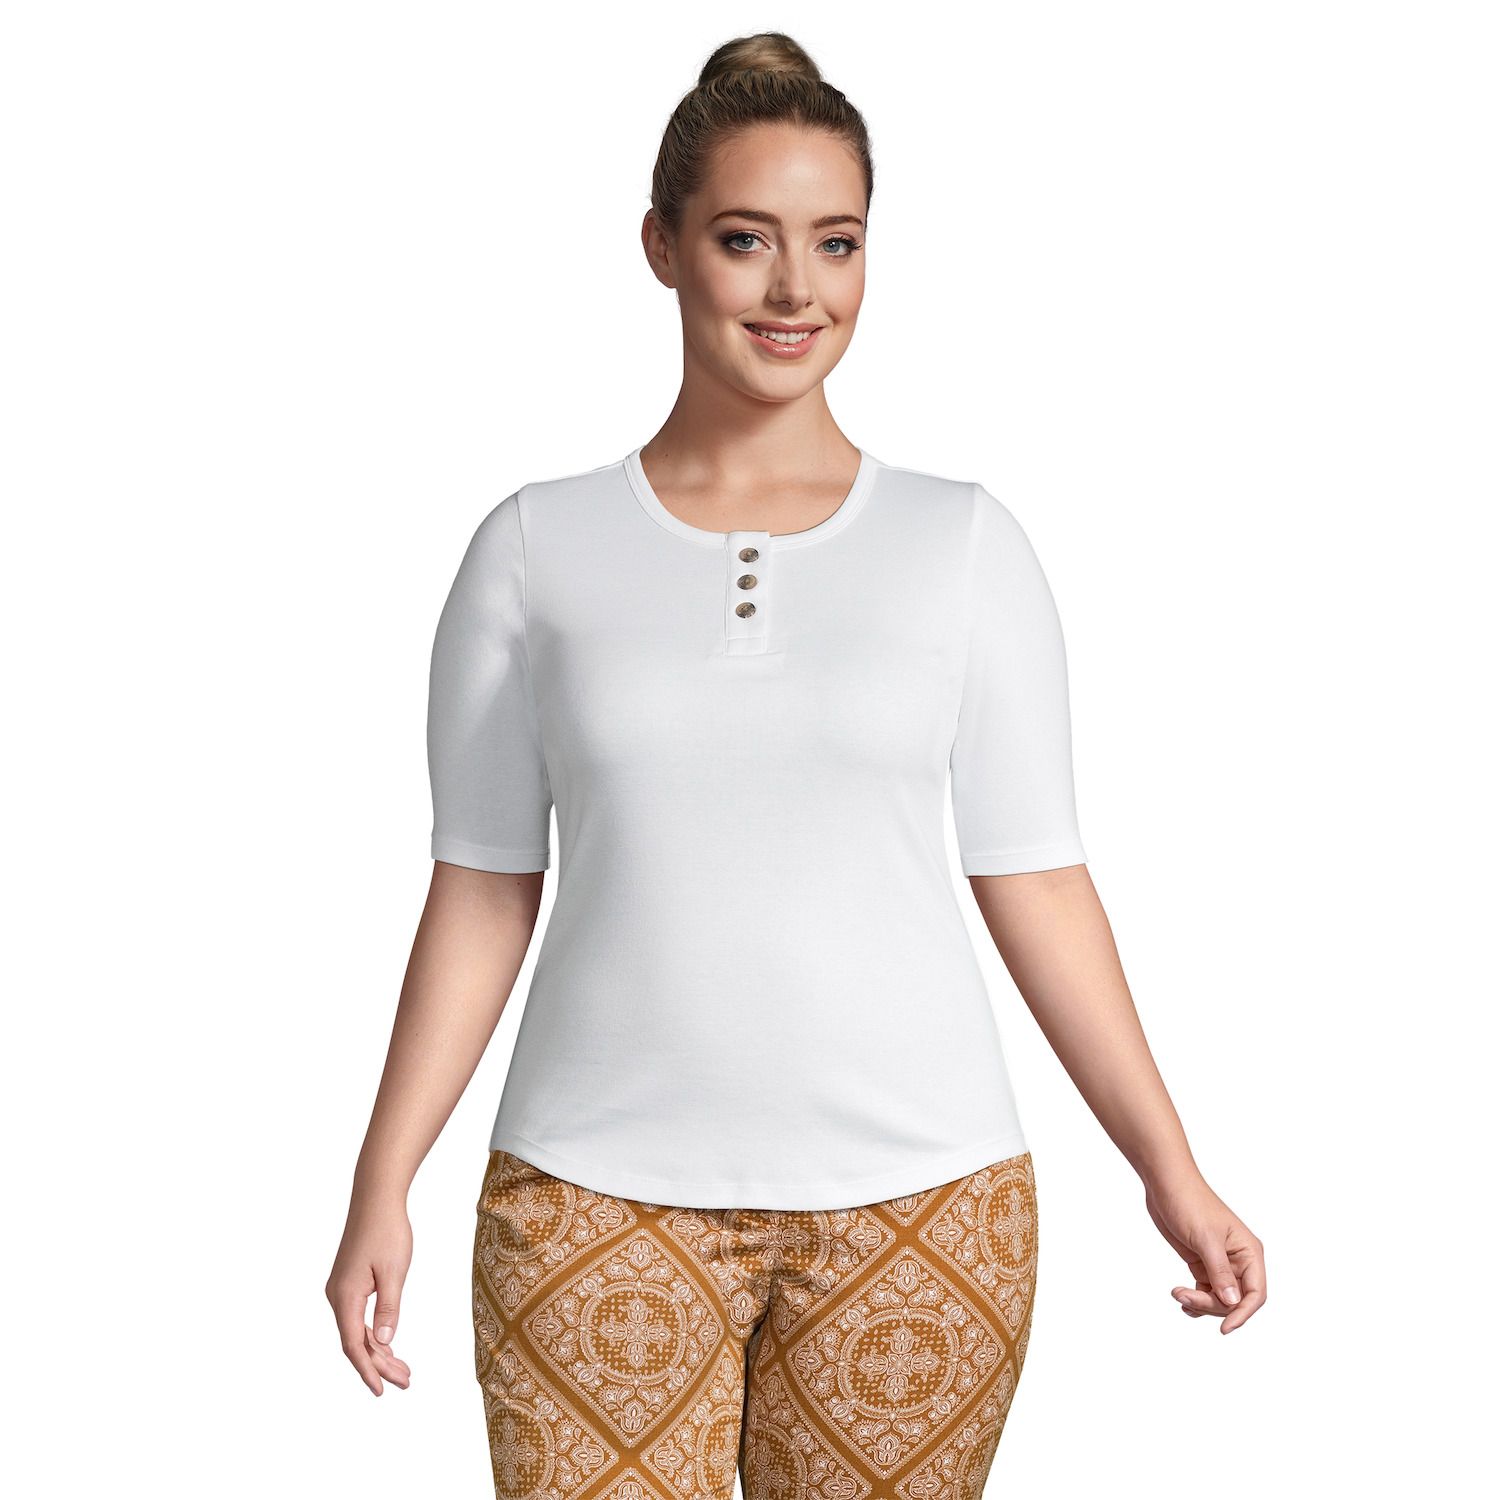 Image for Lands' End Plus Size All Cotton Elbow Sleeve Henley Tee at Kohl's.